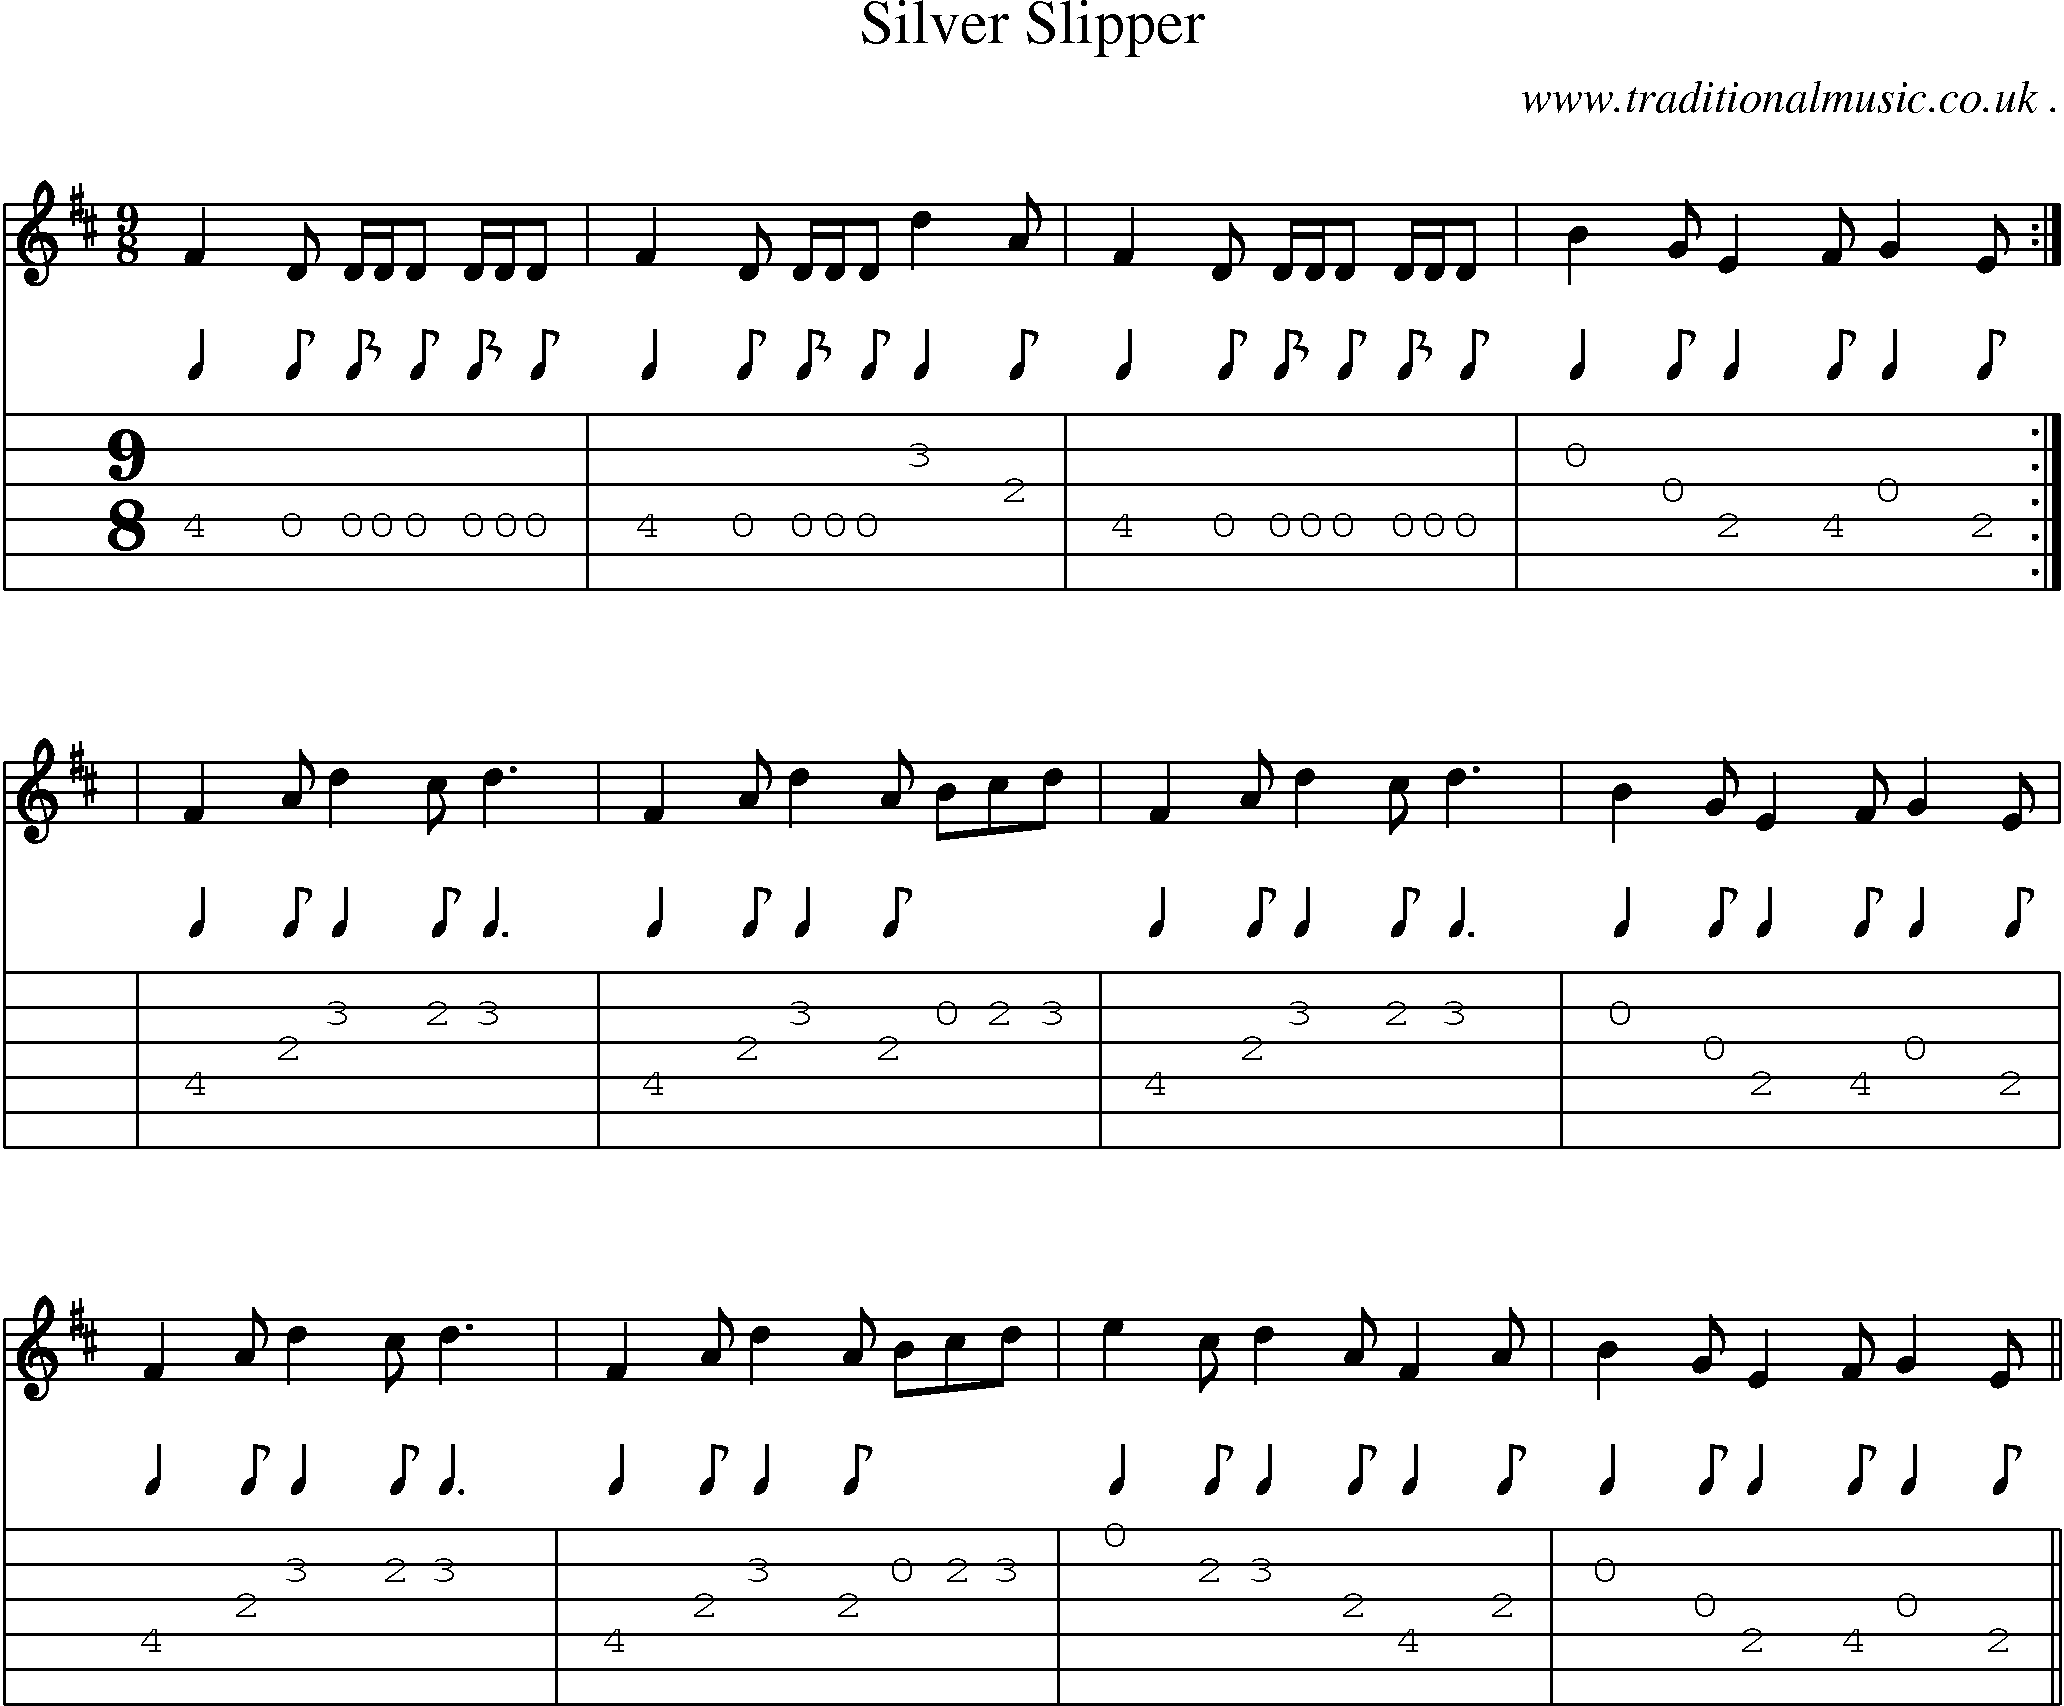 Sheet-Music and Guitar Tabs for Silver Slipper